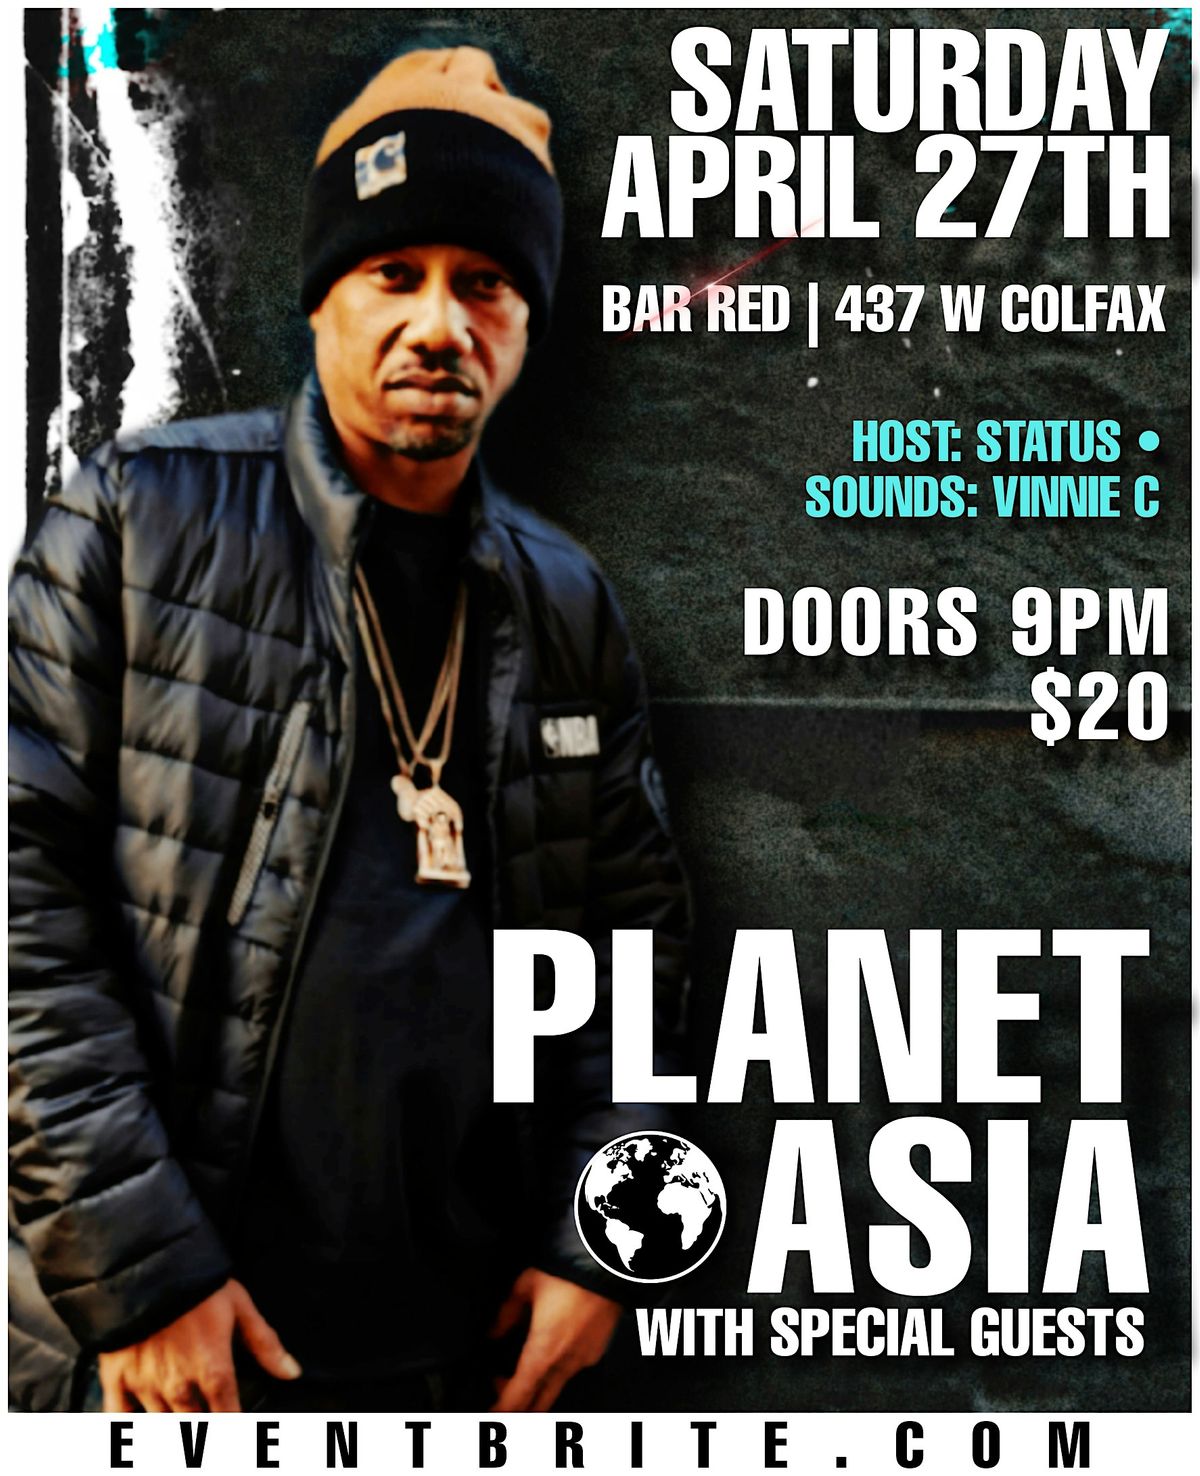 PLANET ASIA *LIVE* AT BAR RED